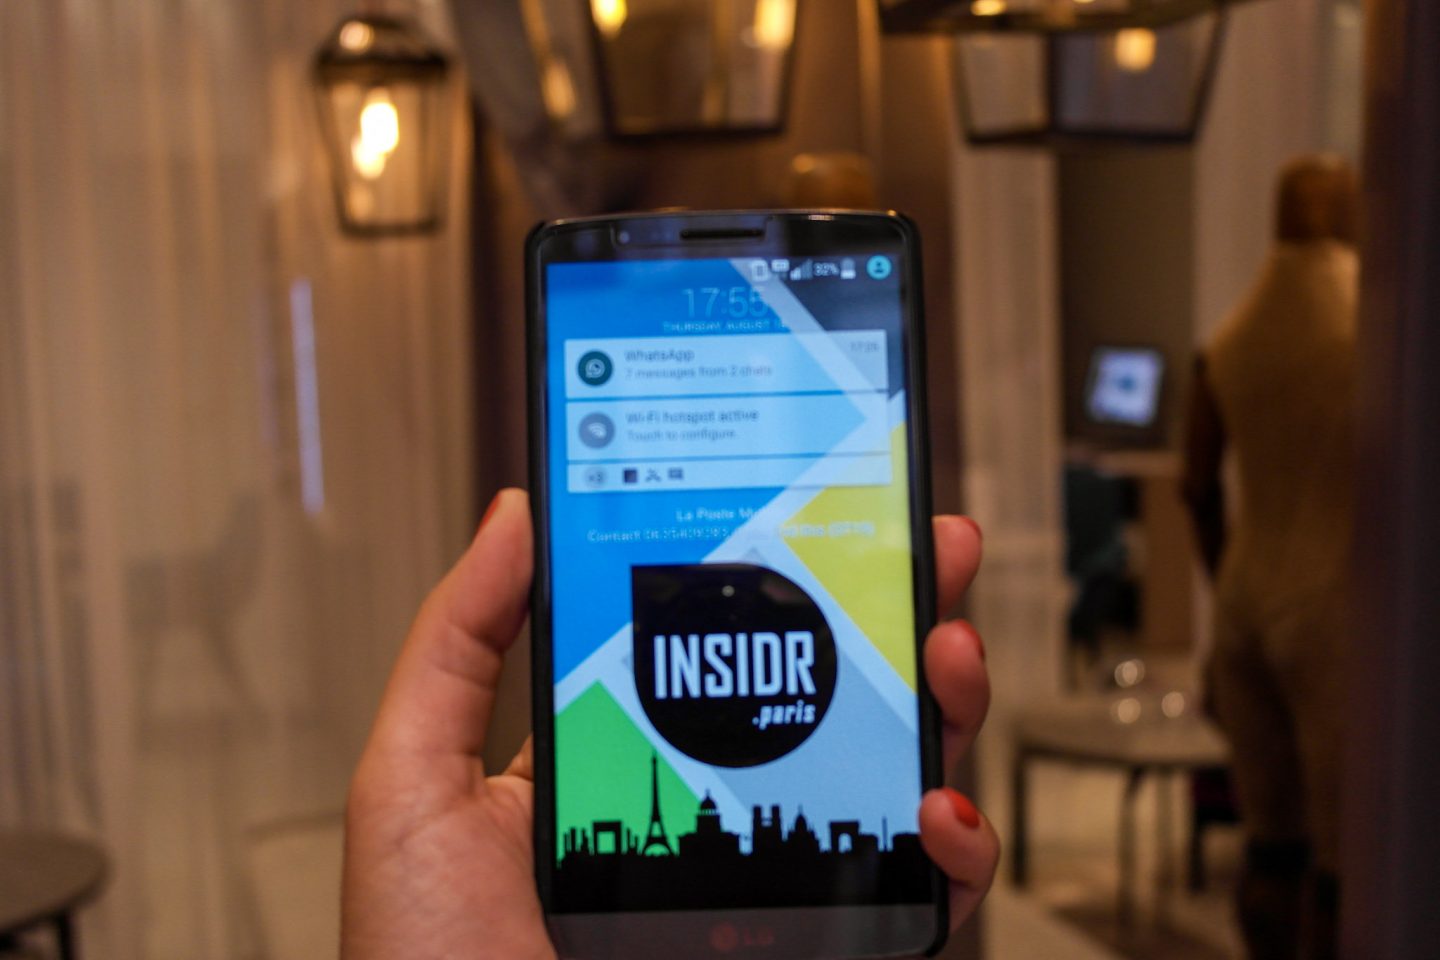 Stay connected with INSIDR.PARIS